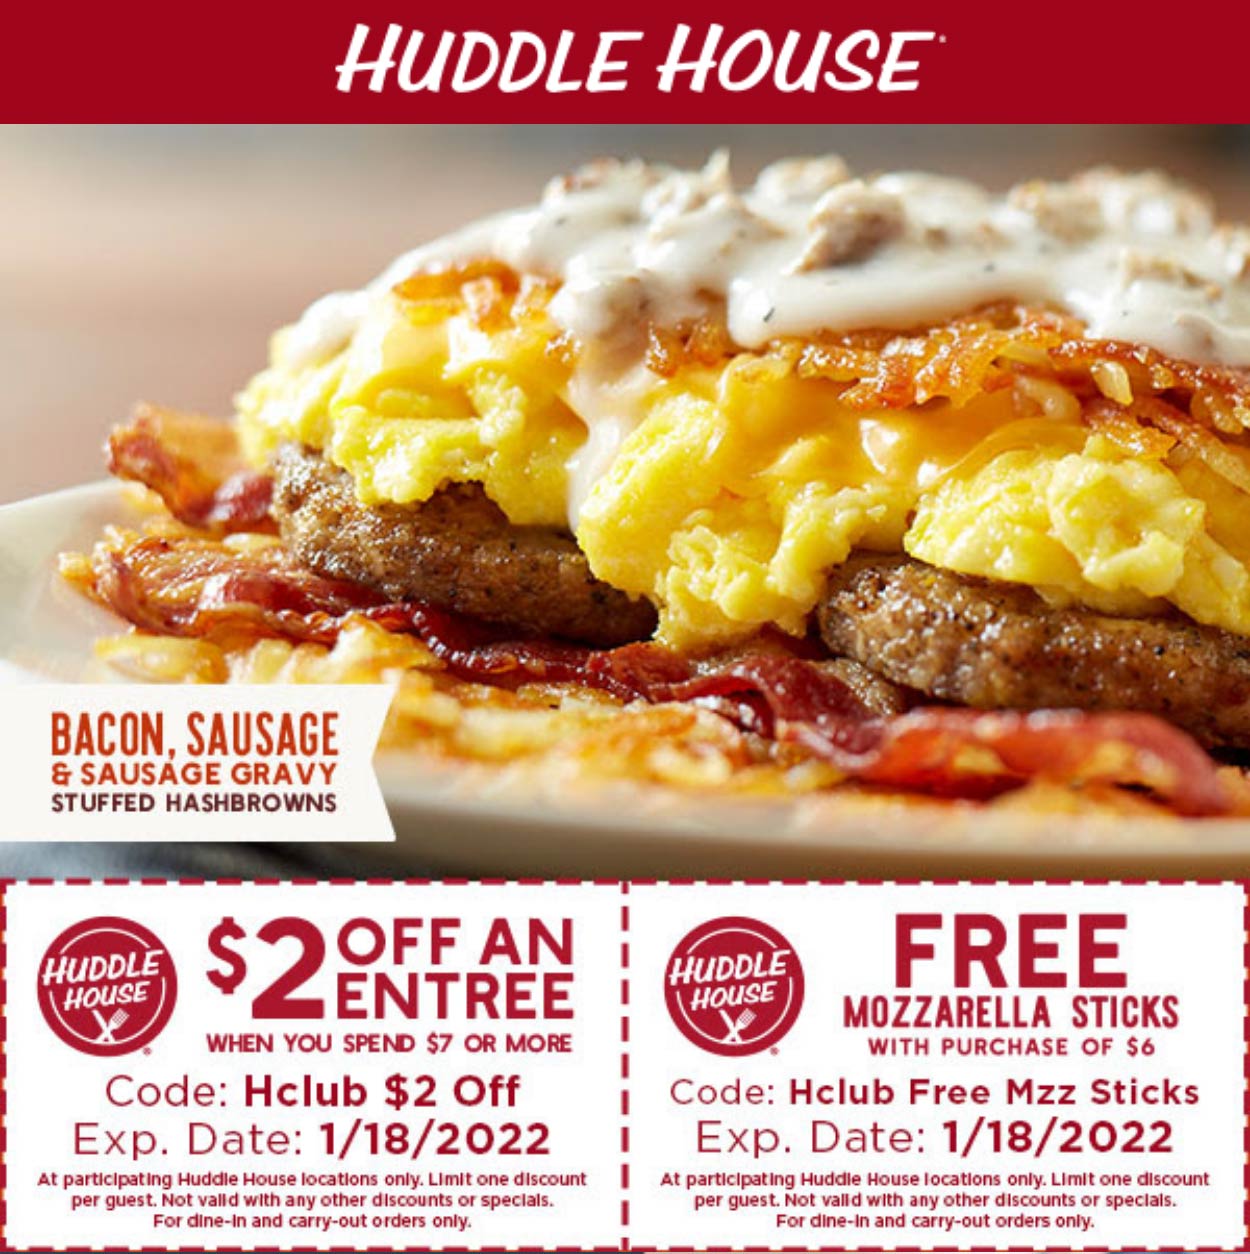 Huddle House restaurants Coupon  $2 off $7 and free mozzarella sticks at Huddle House restaurants #huddlehouse 